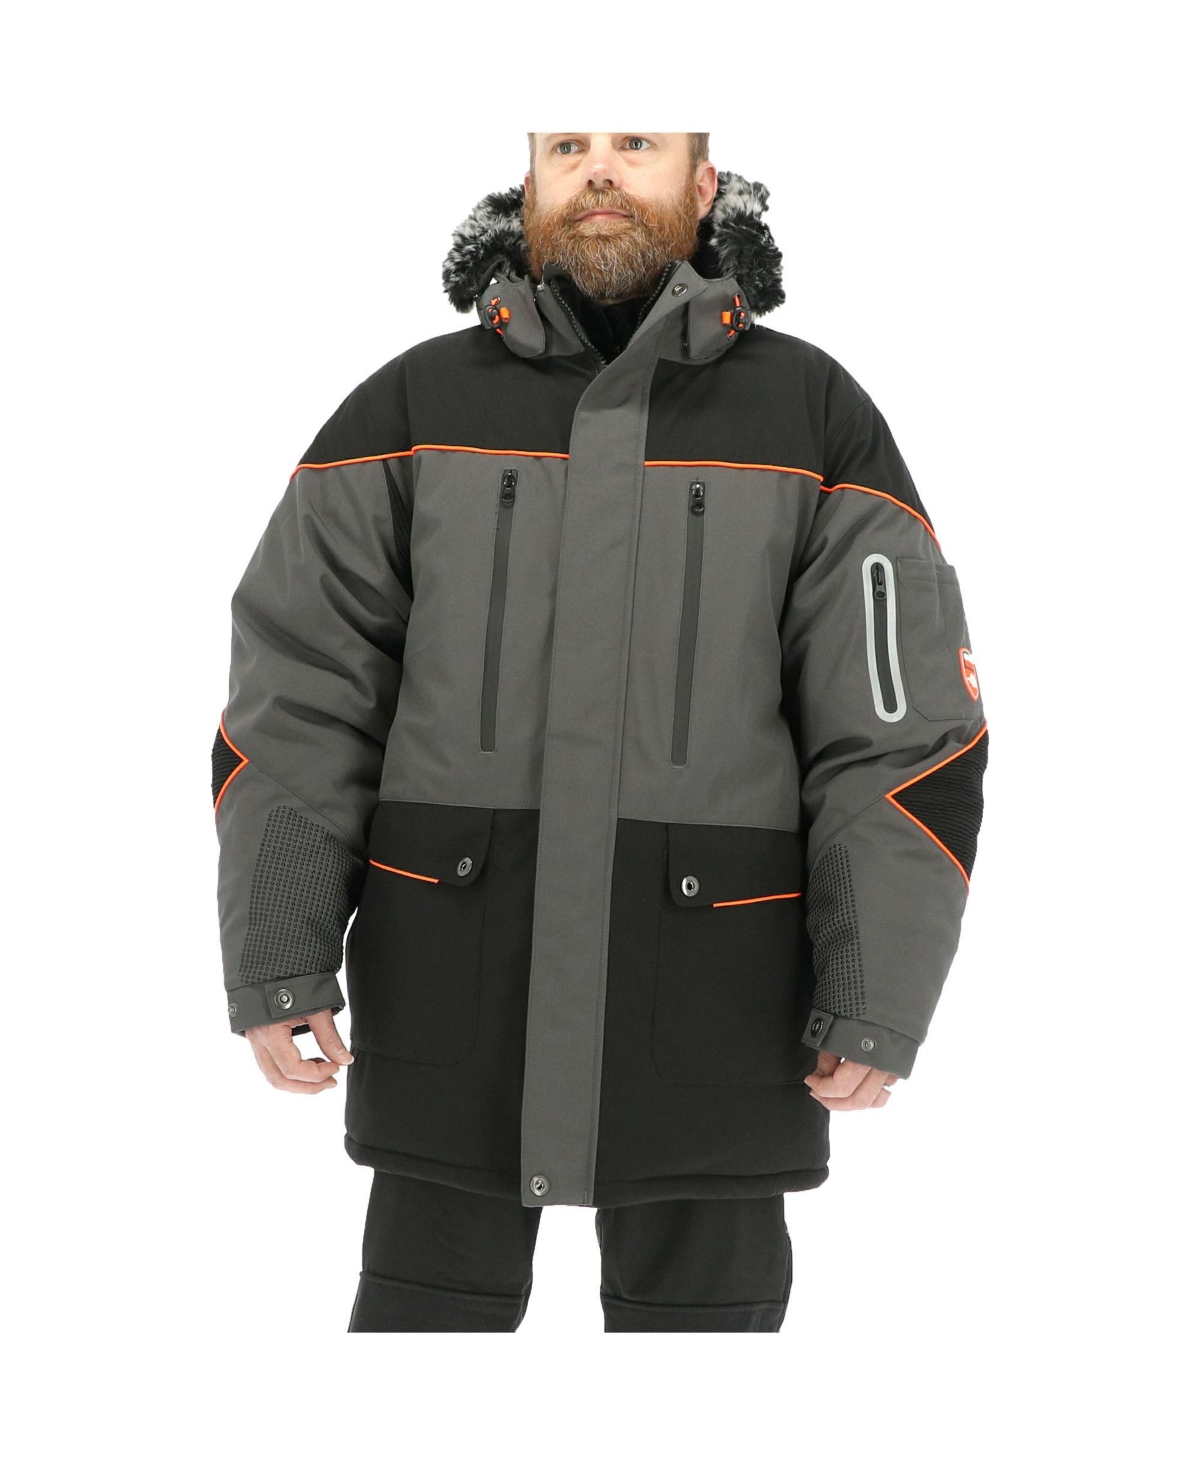 Men's PolarForce Insulated Parka with Detachable Hood - Charcoal